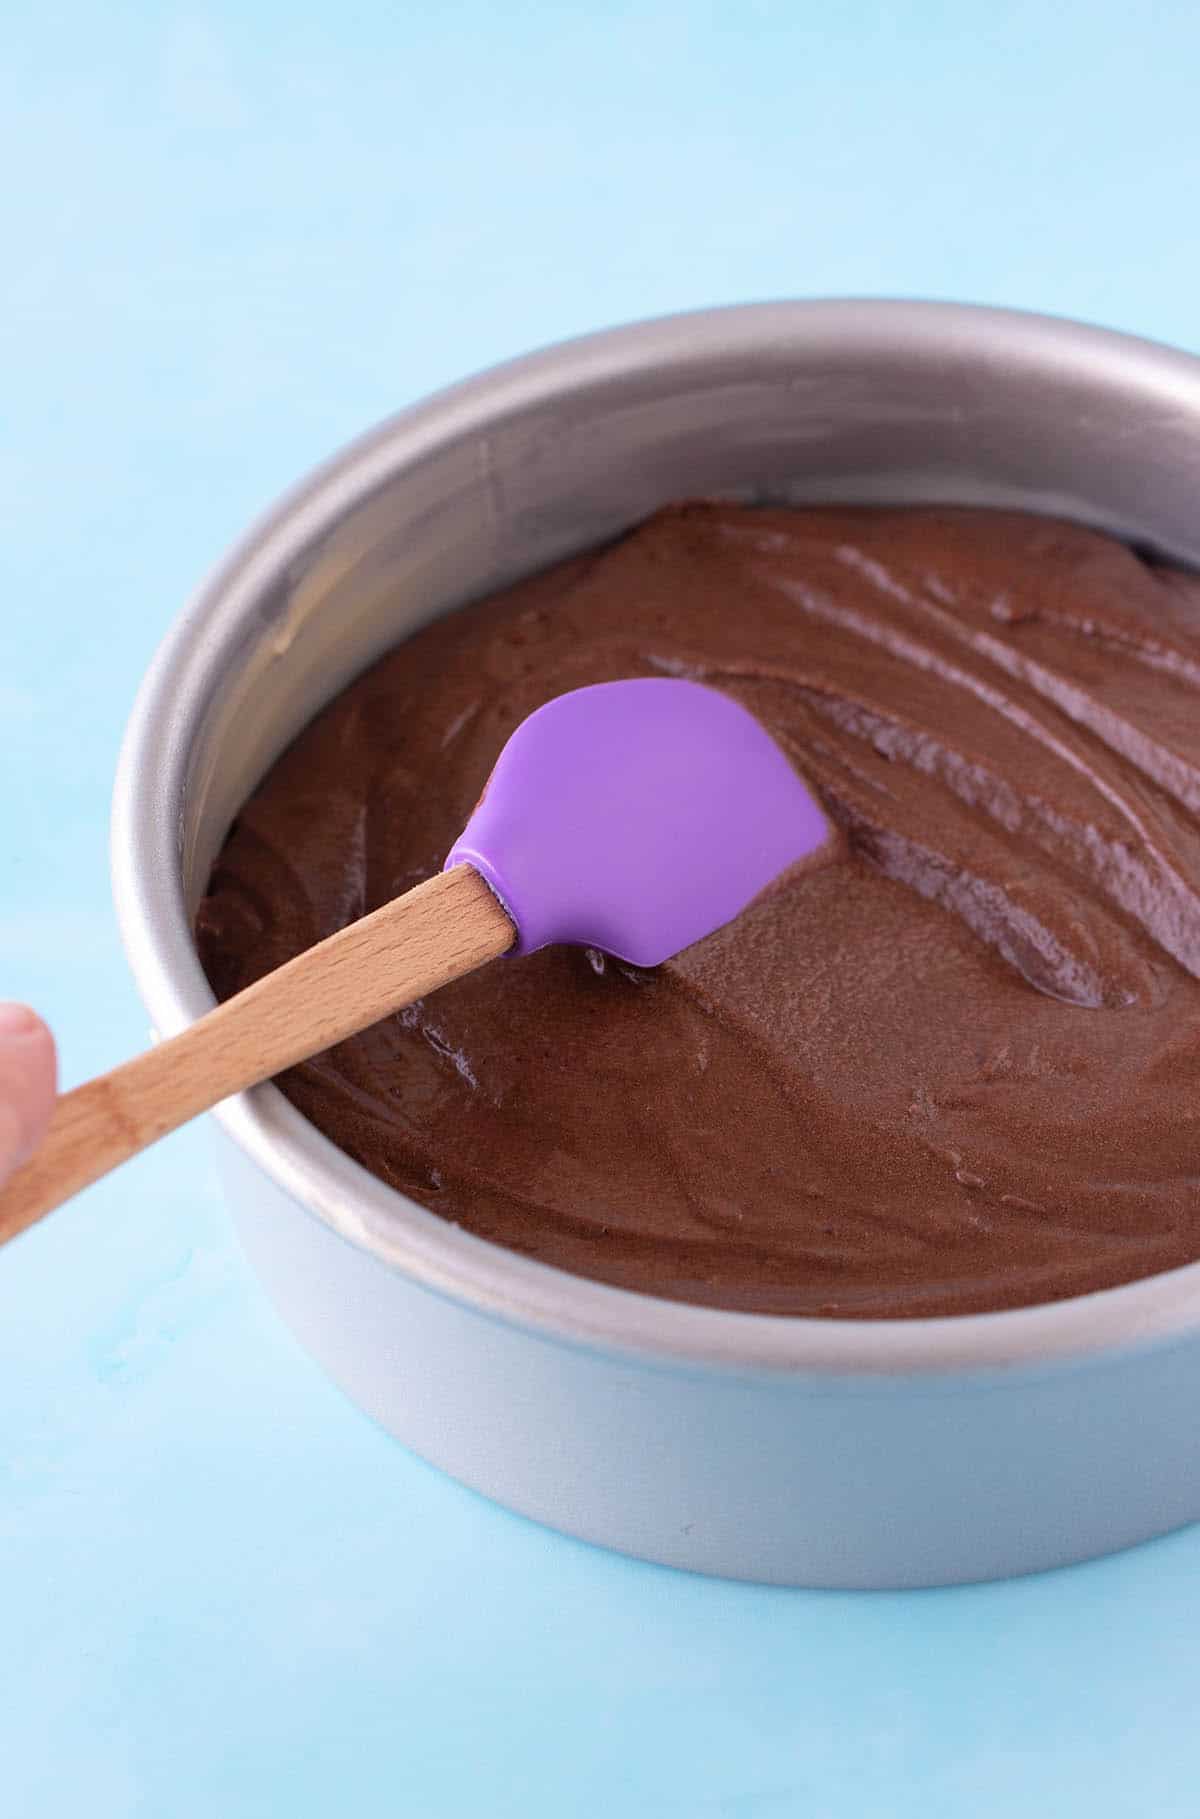 A cake pan filled with chocolate cake batter ready to go in the oven